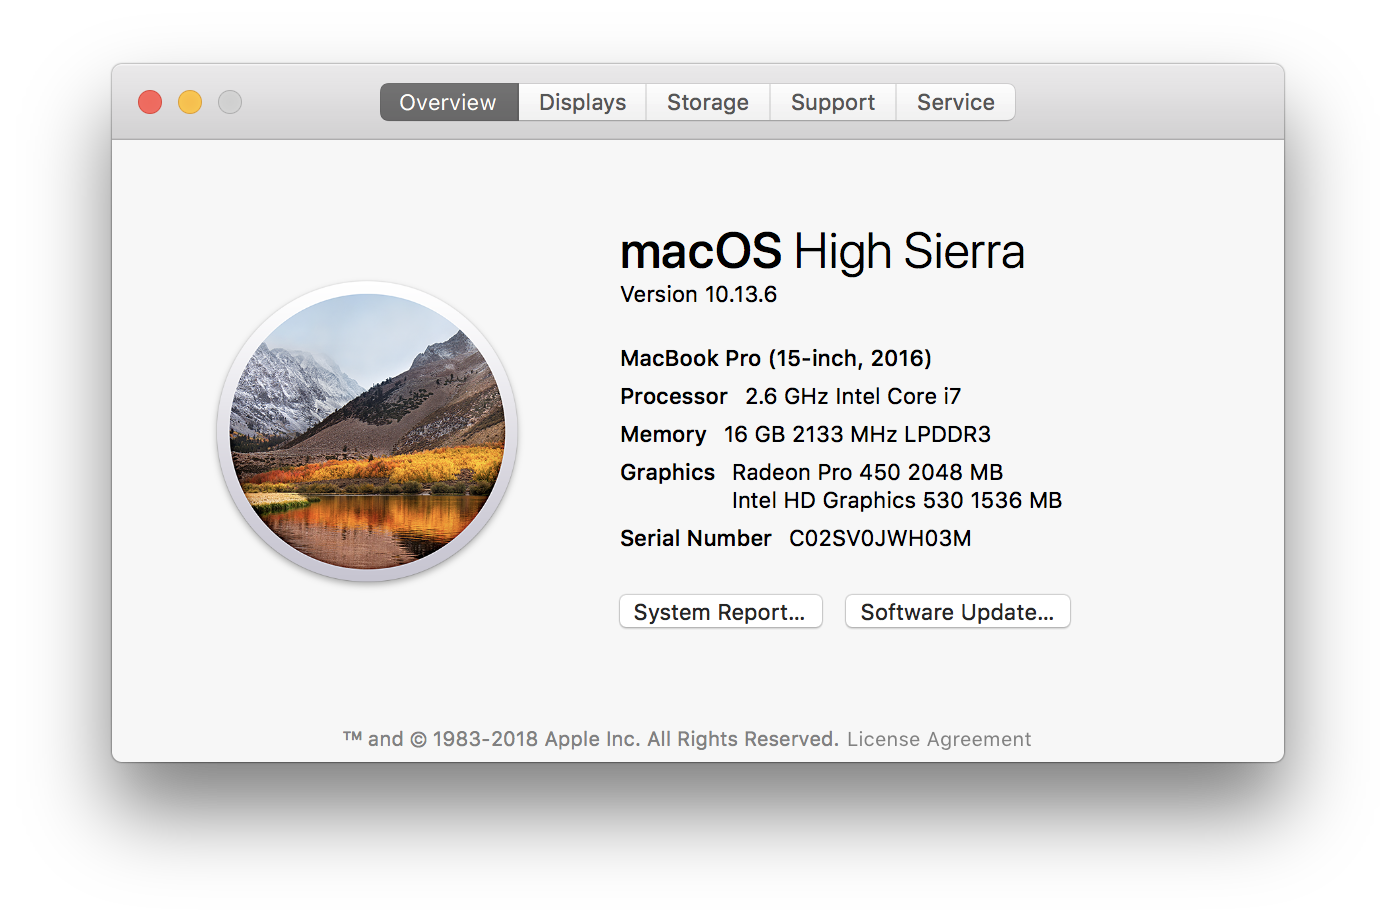 macos mojave hardware requirements